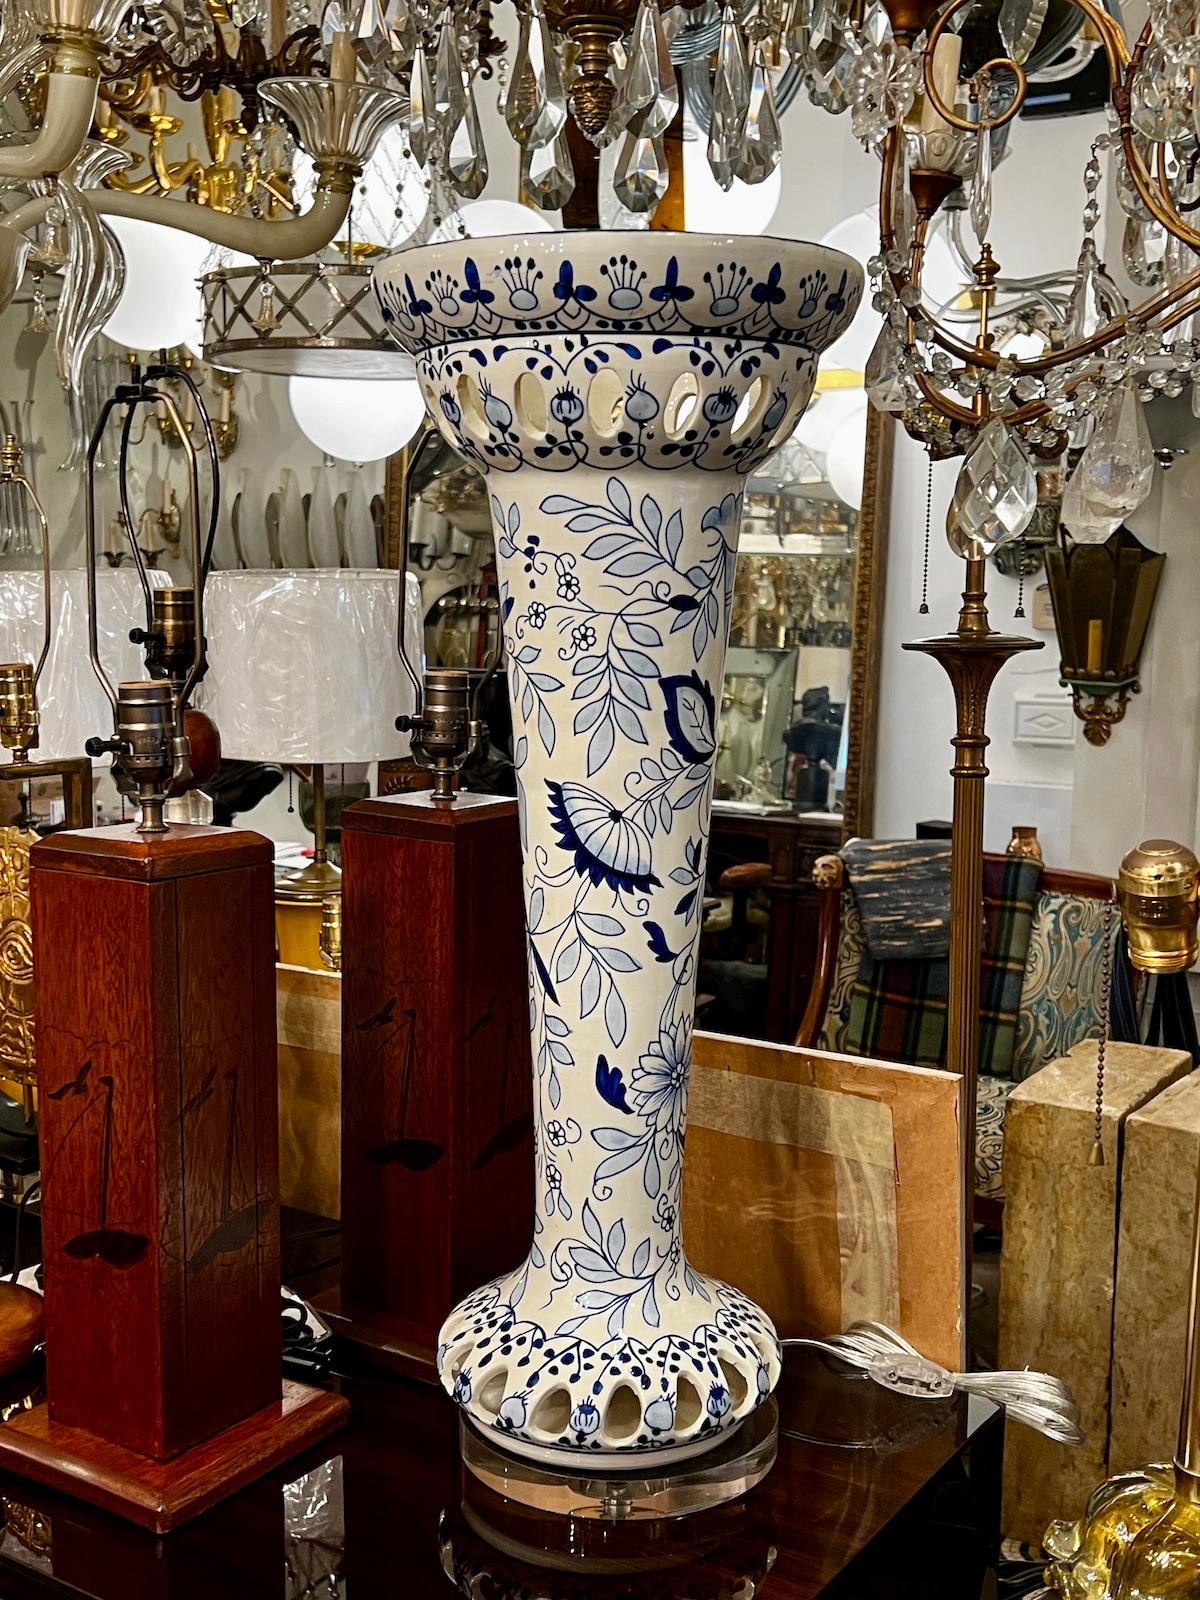 A circa 1960's Italian table lamp with painted foliage motif and one interior light.

Measurements:
Height: 29